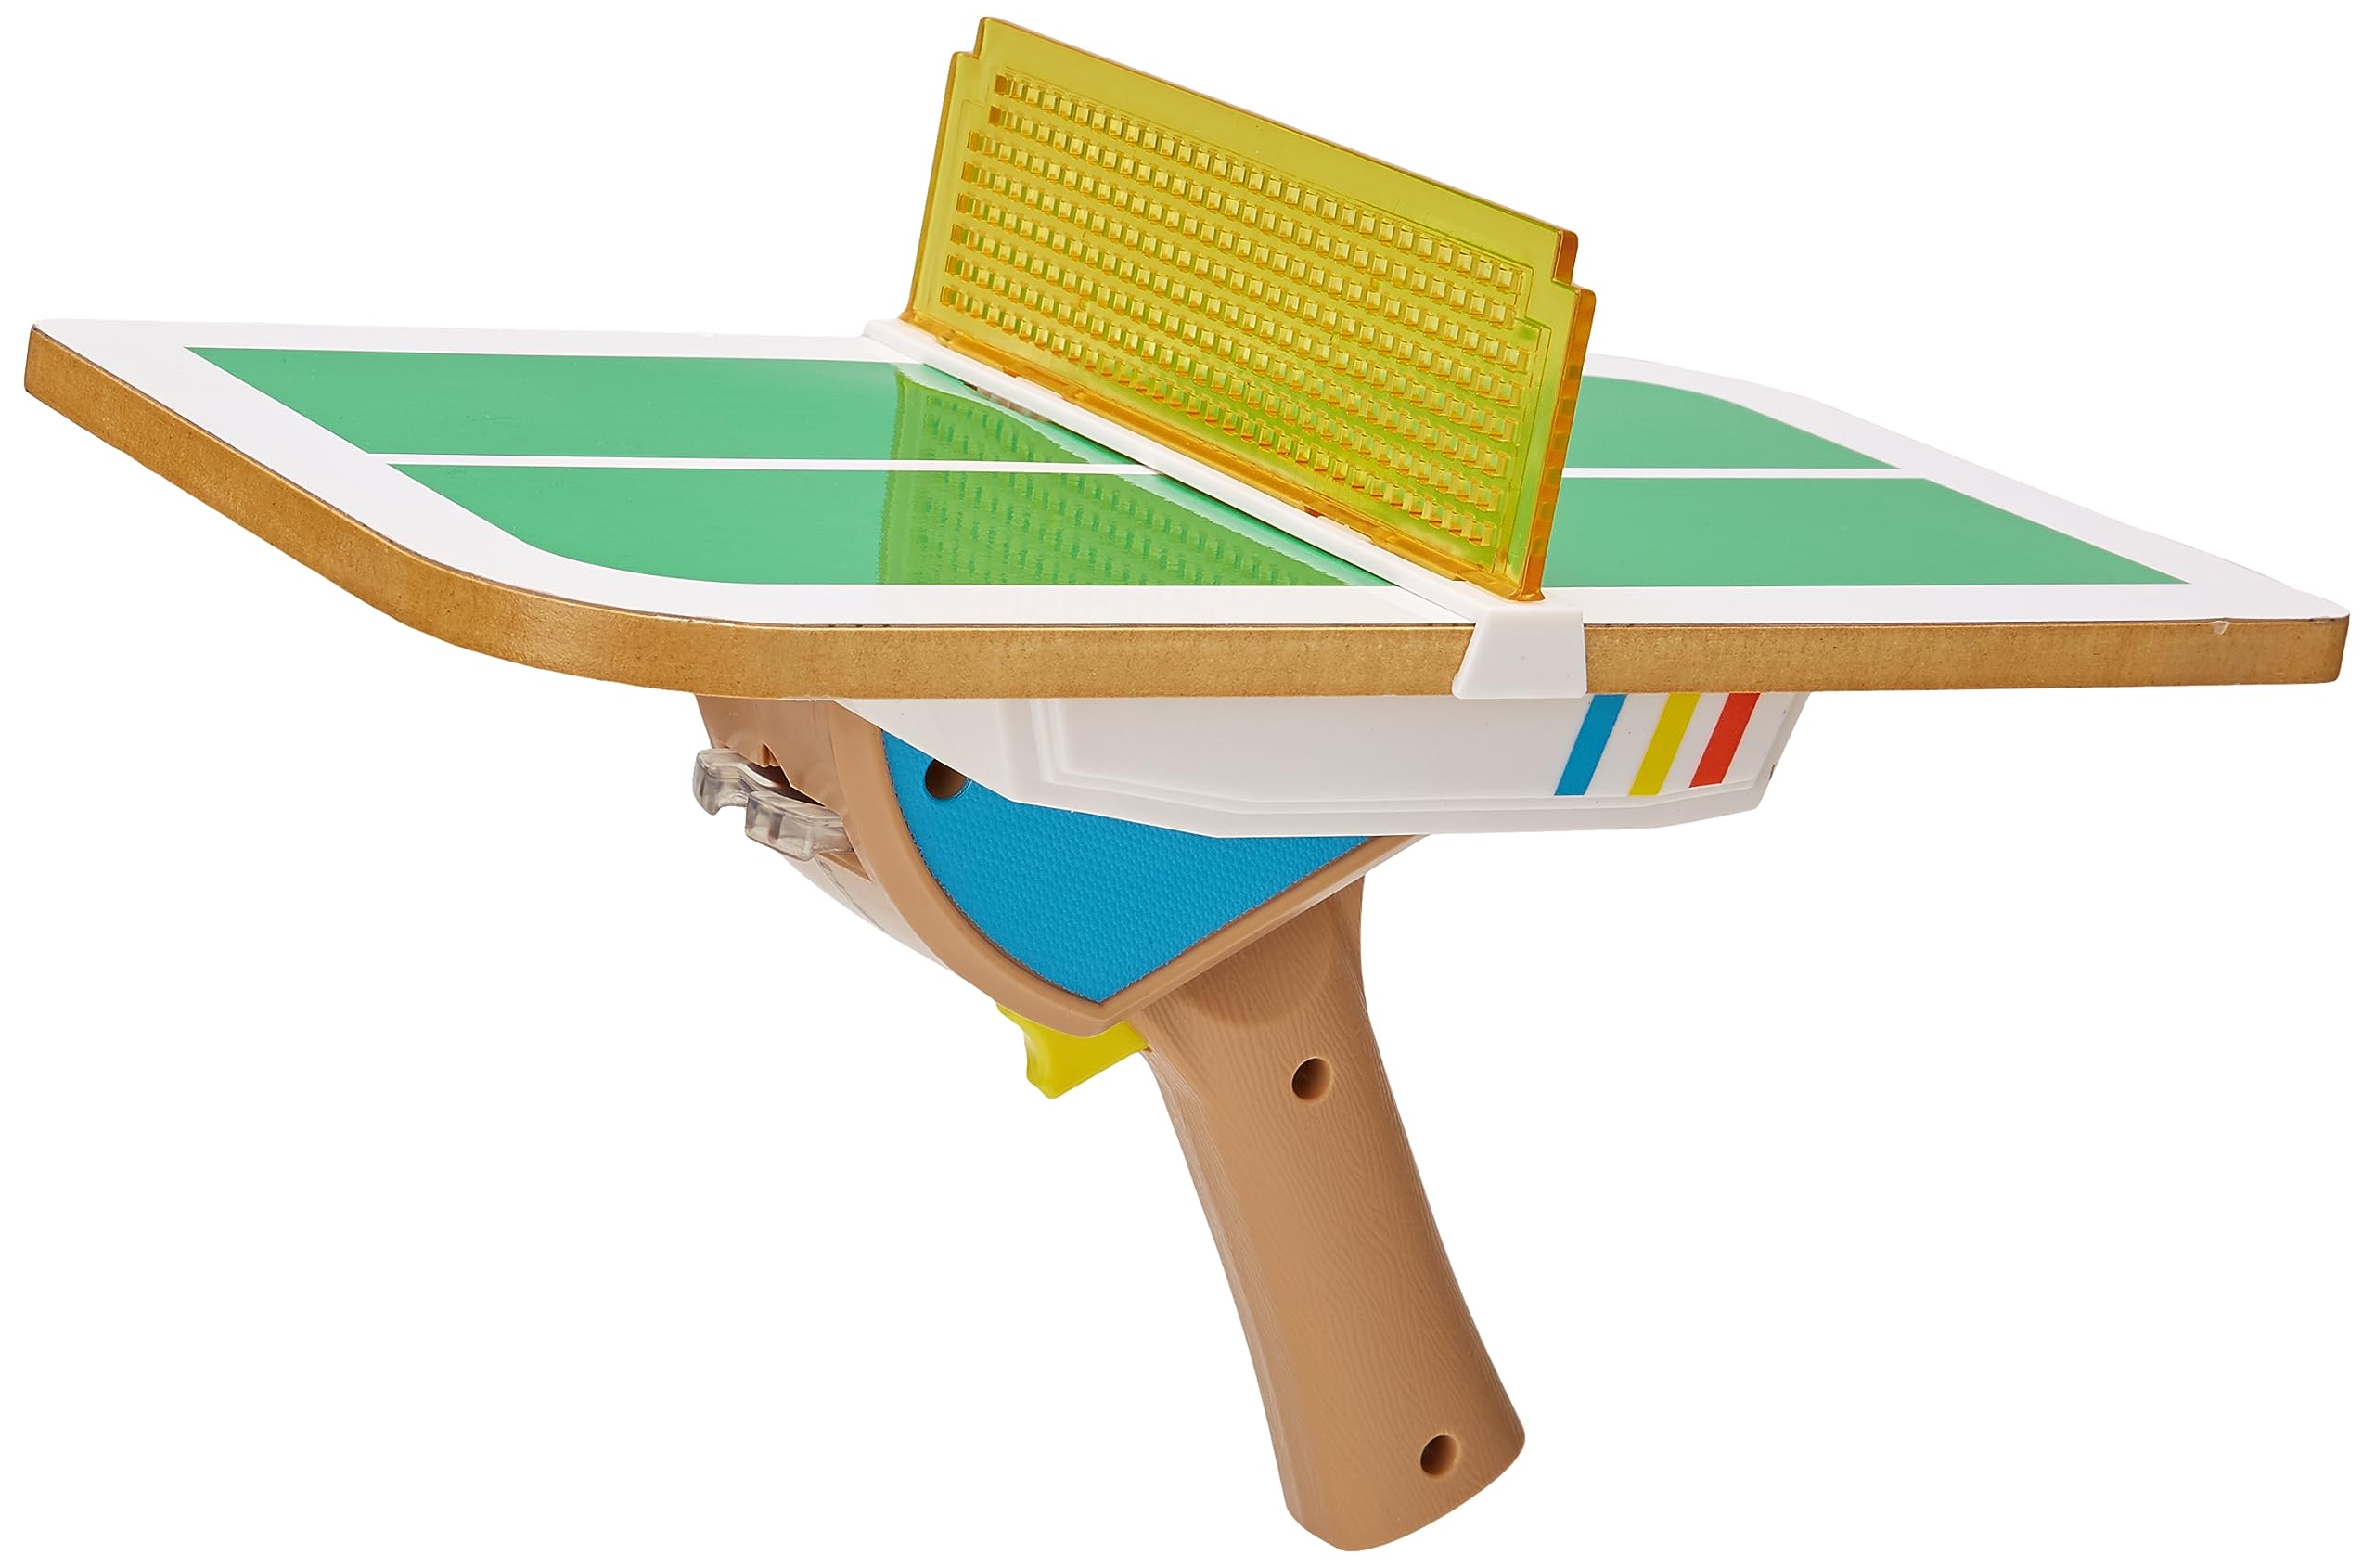 Hasbro Gaming Tiny Pong Solo Table Tennis Kids Electronic Handheld Game Ages 8 and Up